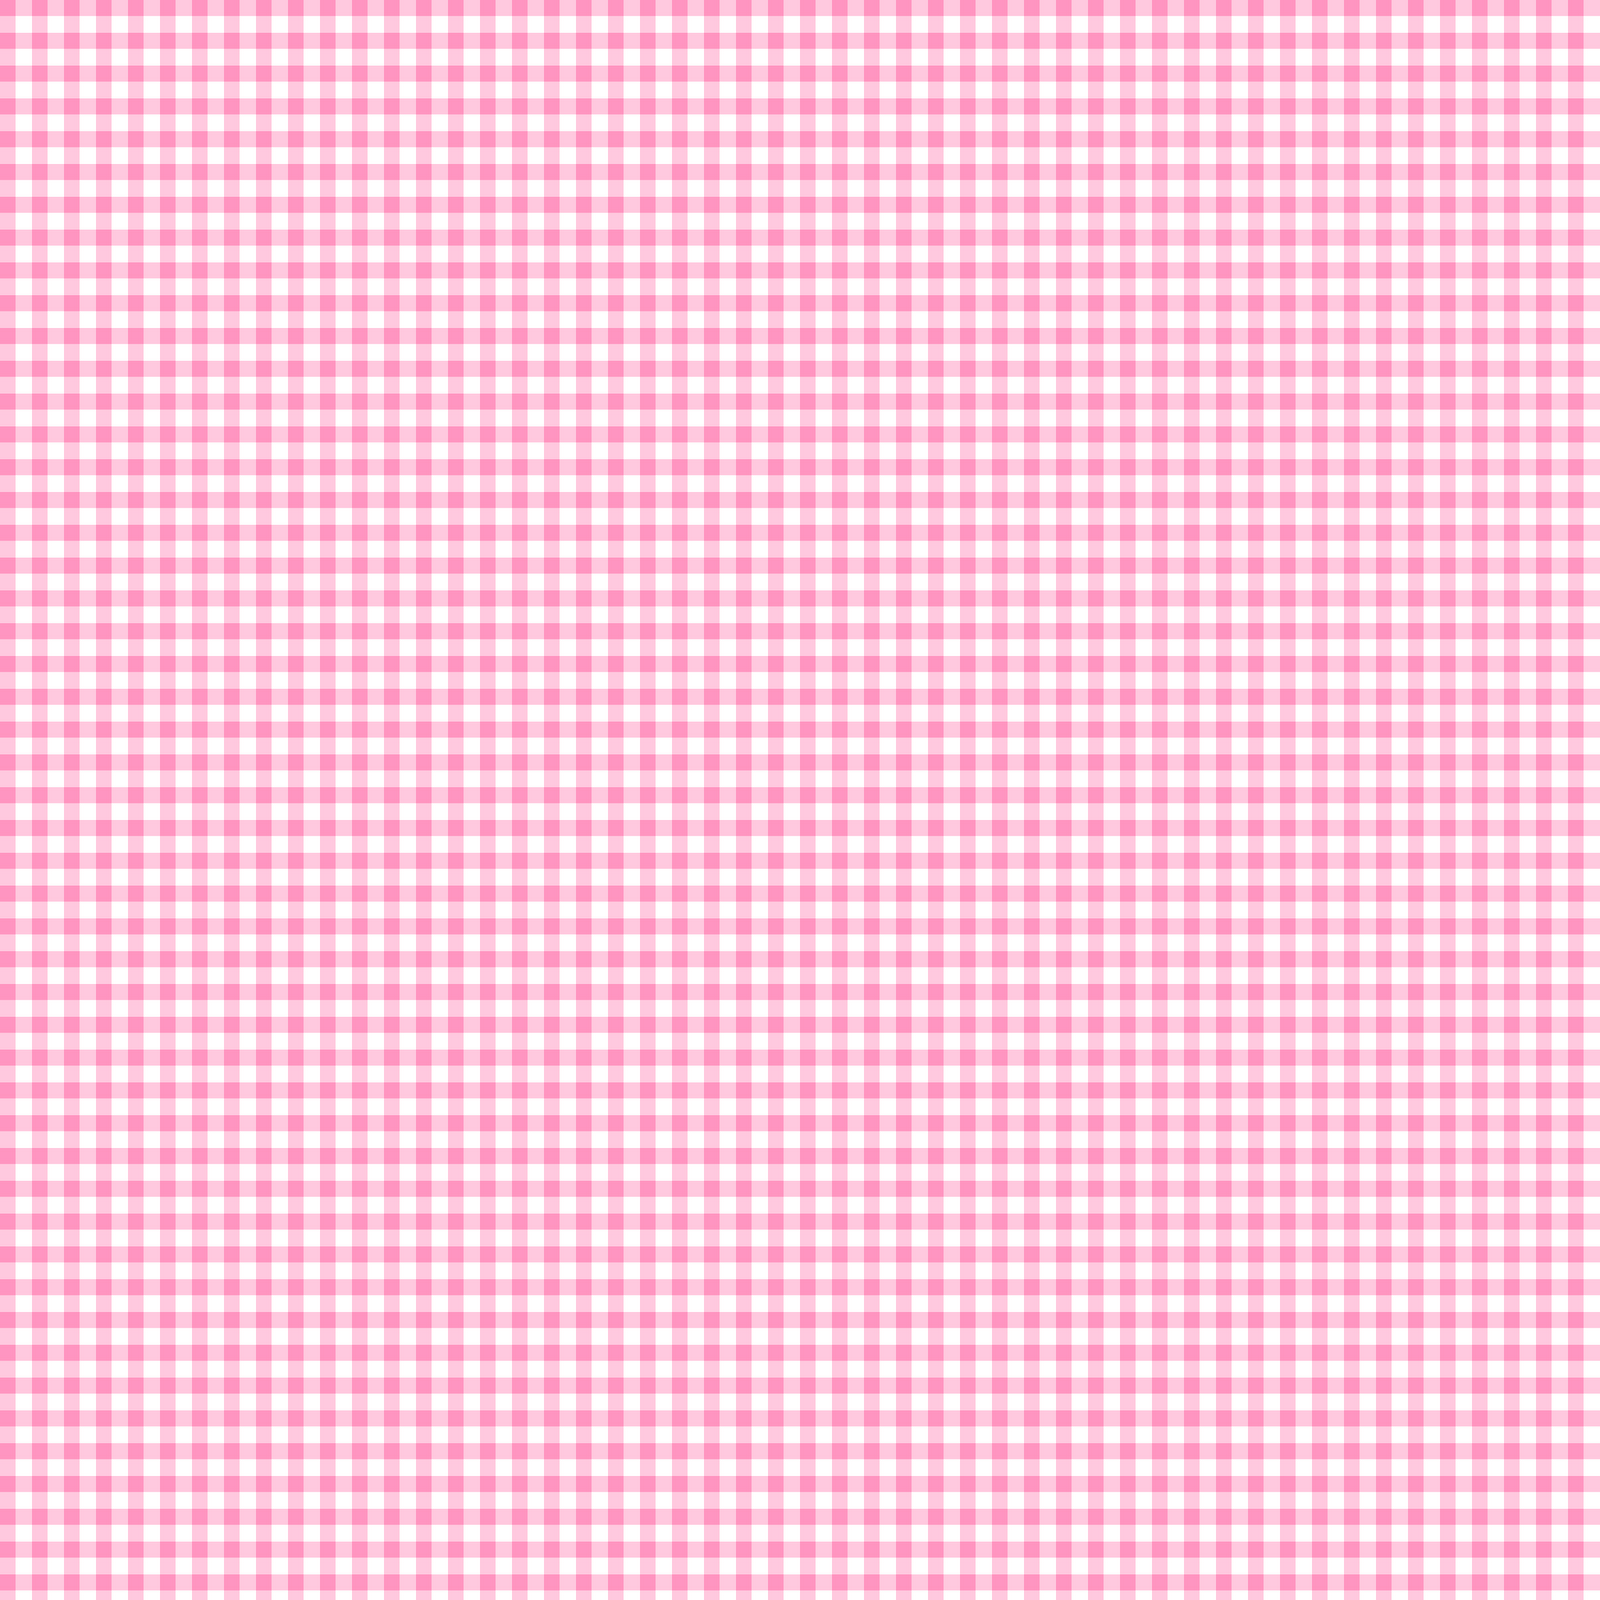 Pink and White Clip art